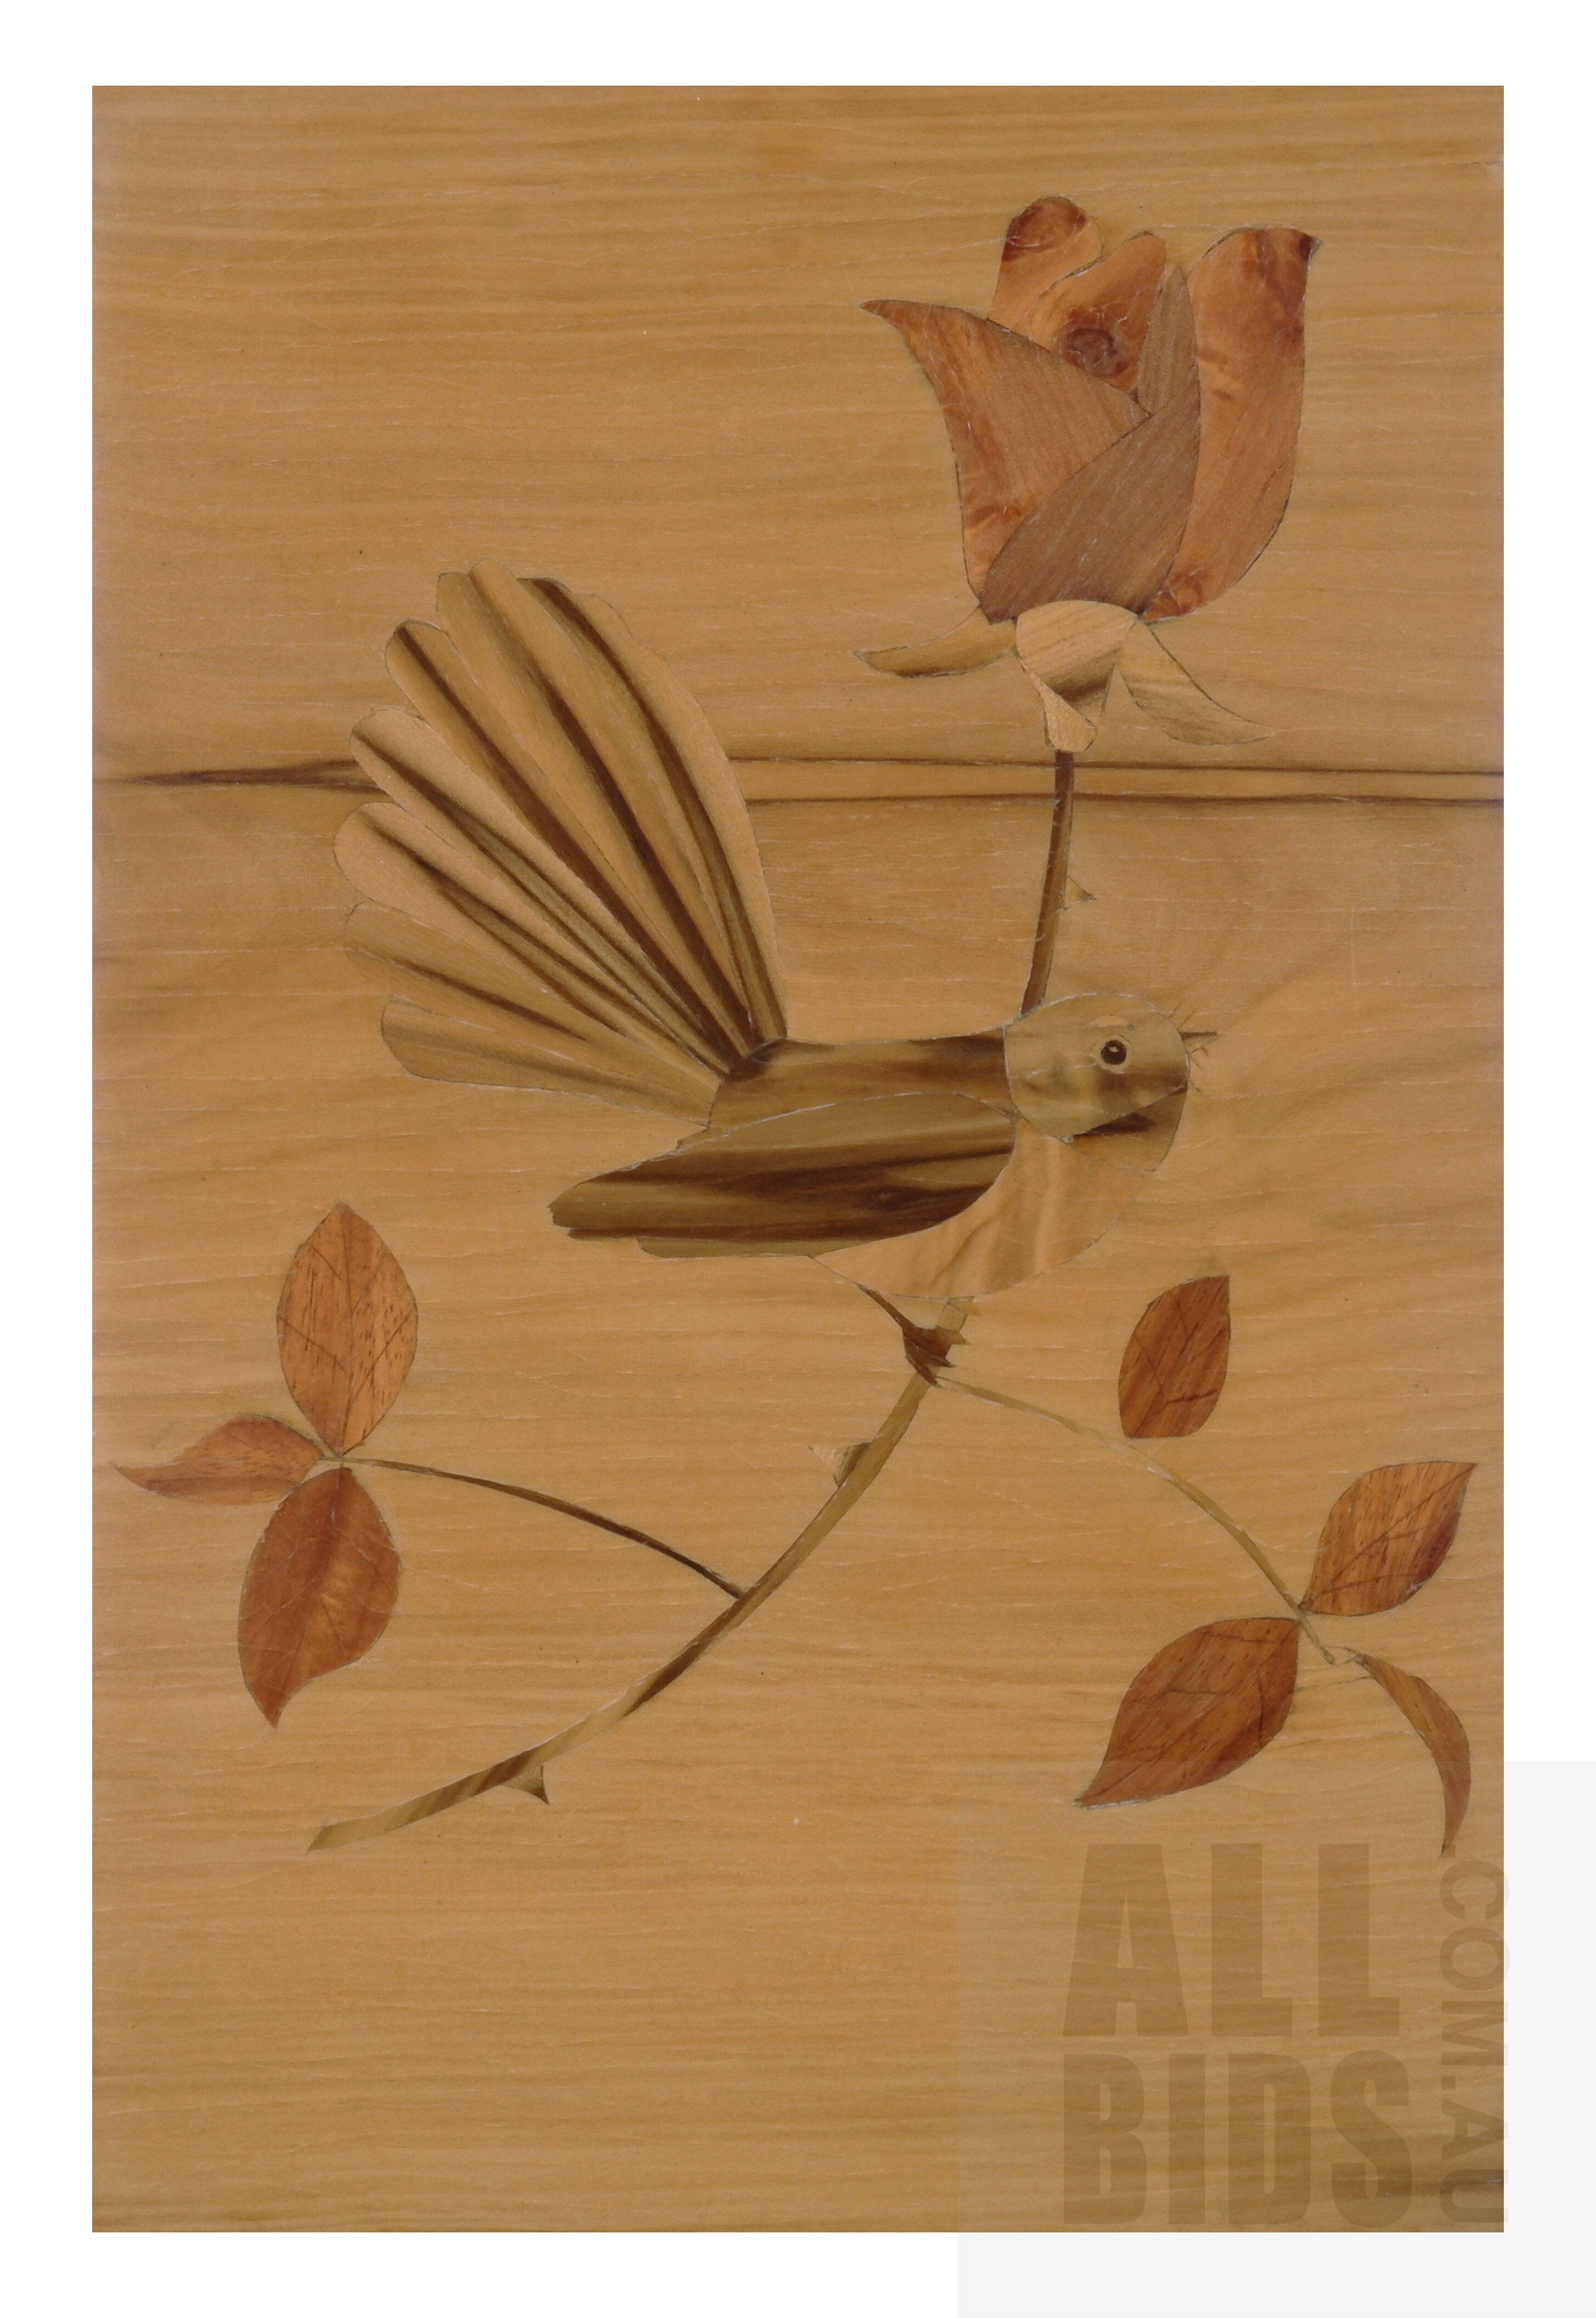 'Francis Whitley (20th Century, Australian), Fantail and Rose, Marquetry Design including Blackheart Sassafras, Myrtle and Blackwood (Tasmanian), 30 x 20 cm'